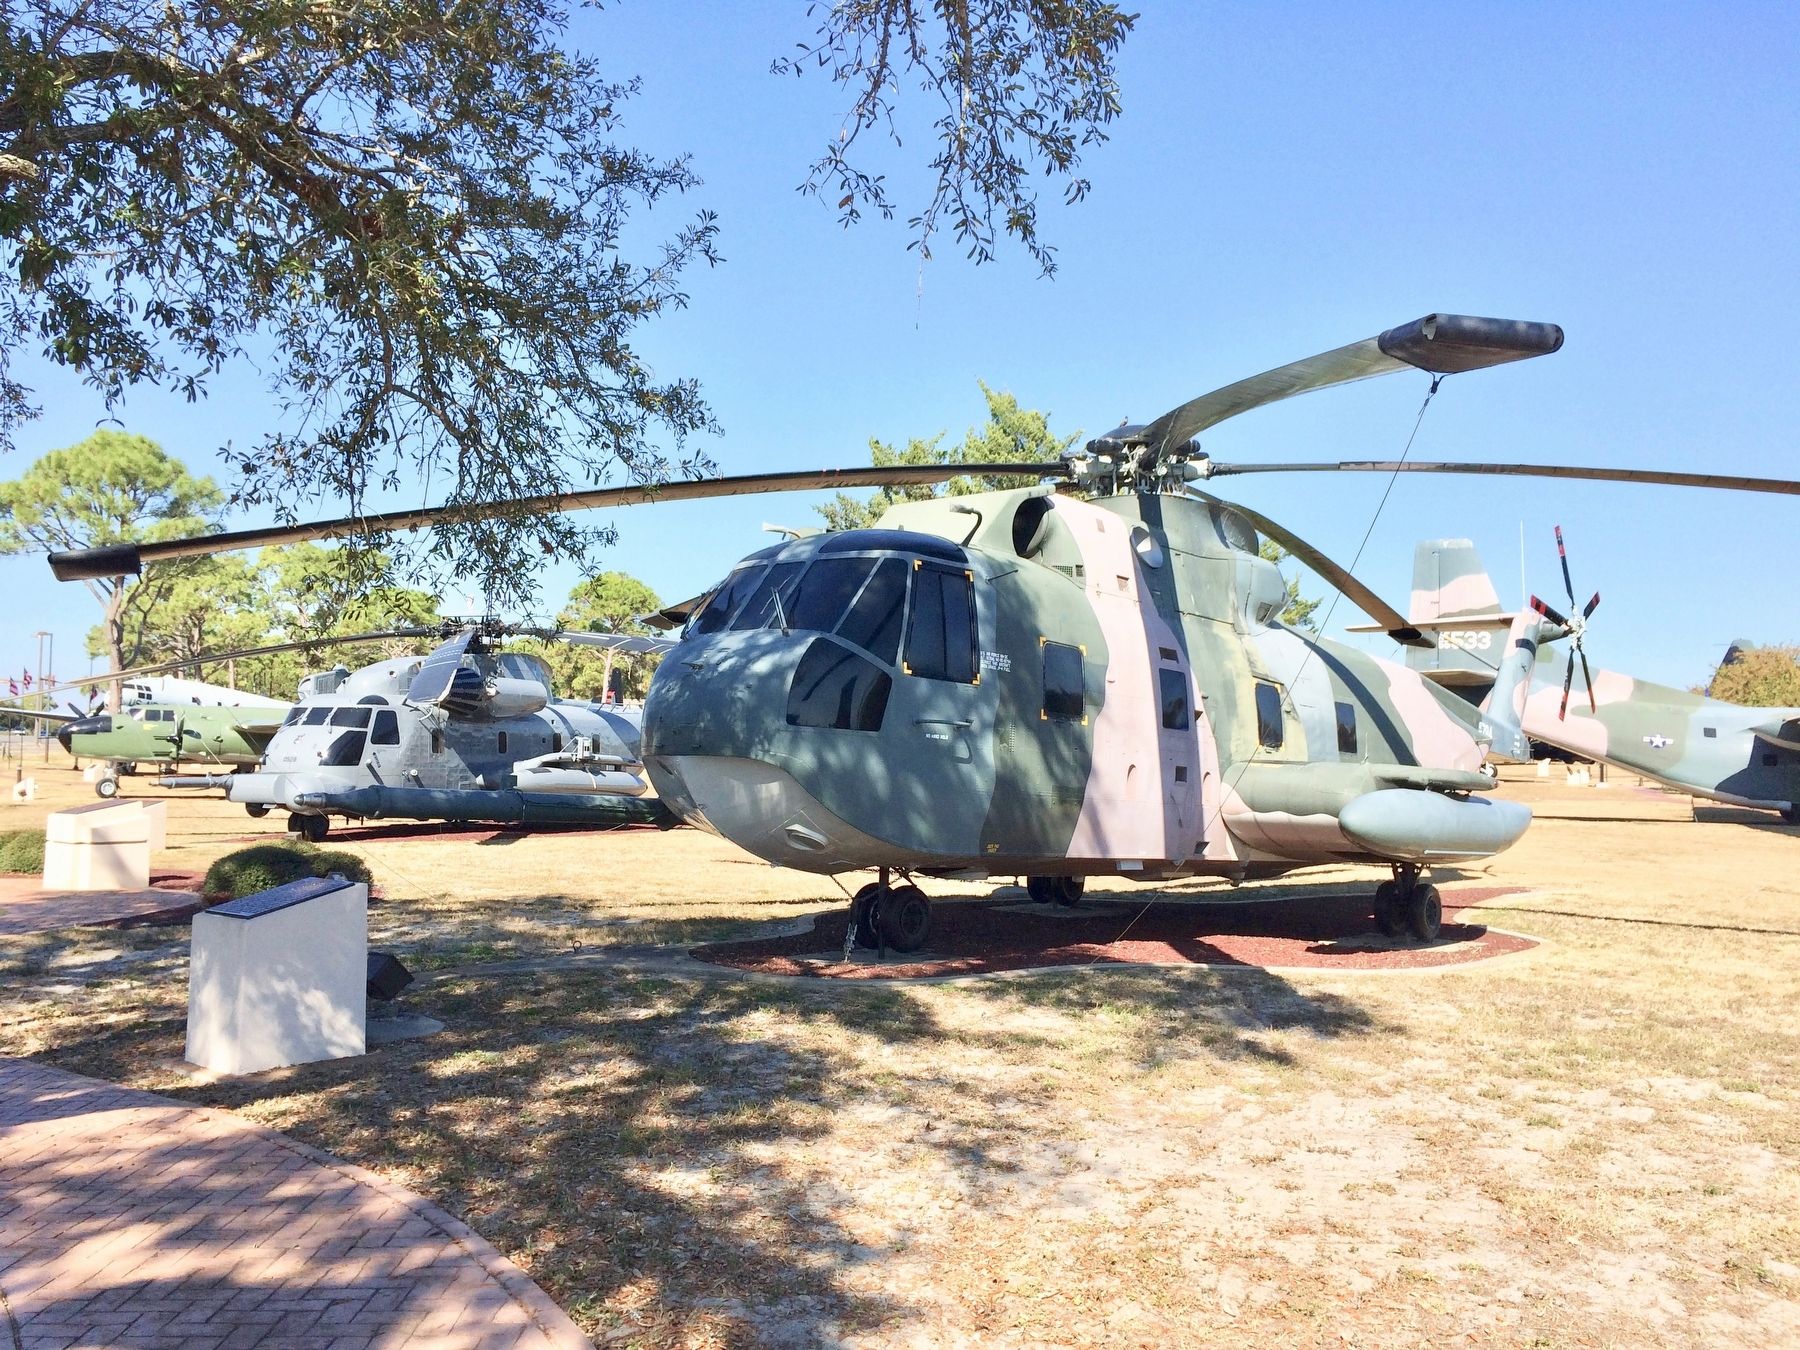 HH-3E "Jolly Green Giant" helicopter. image. Click for full size.